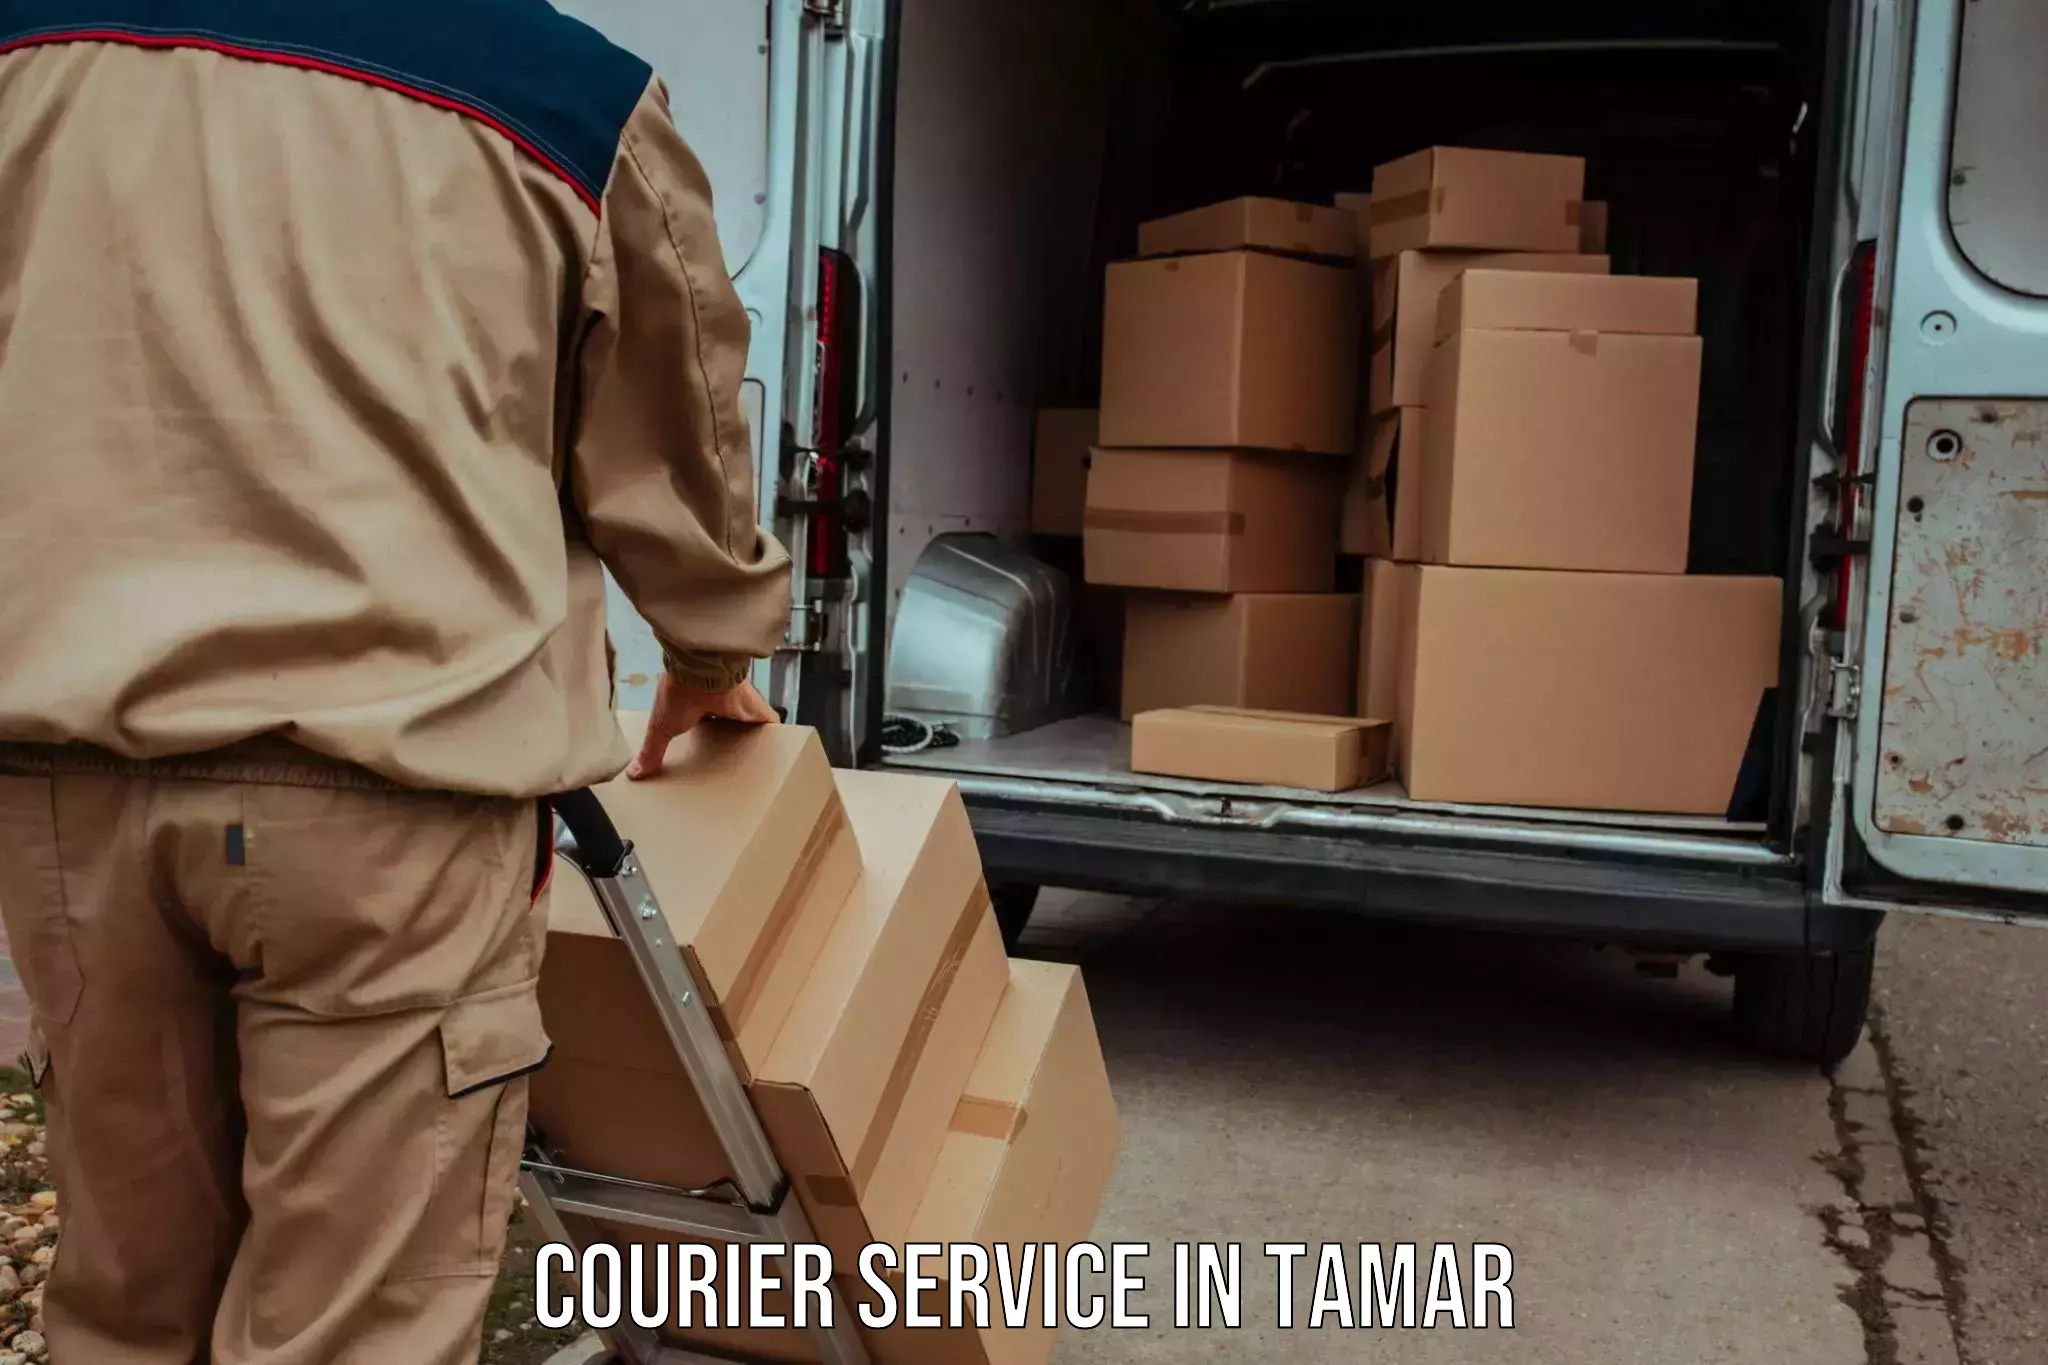 Domestic delivery options in Tamar